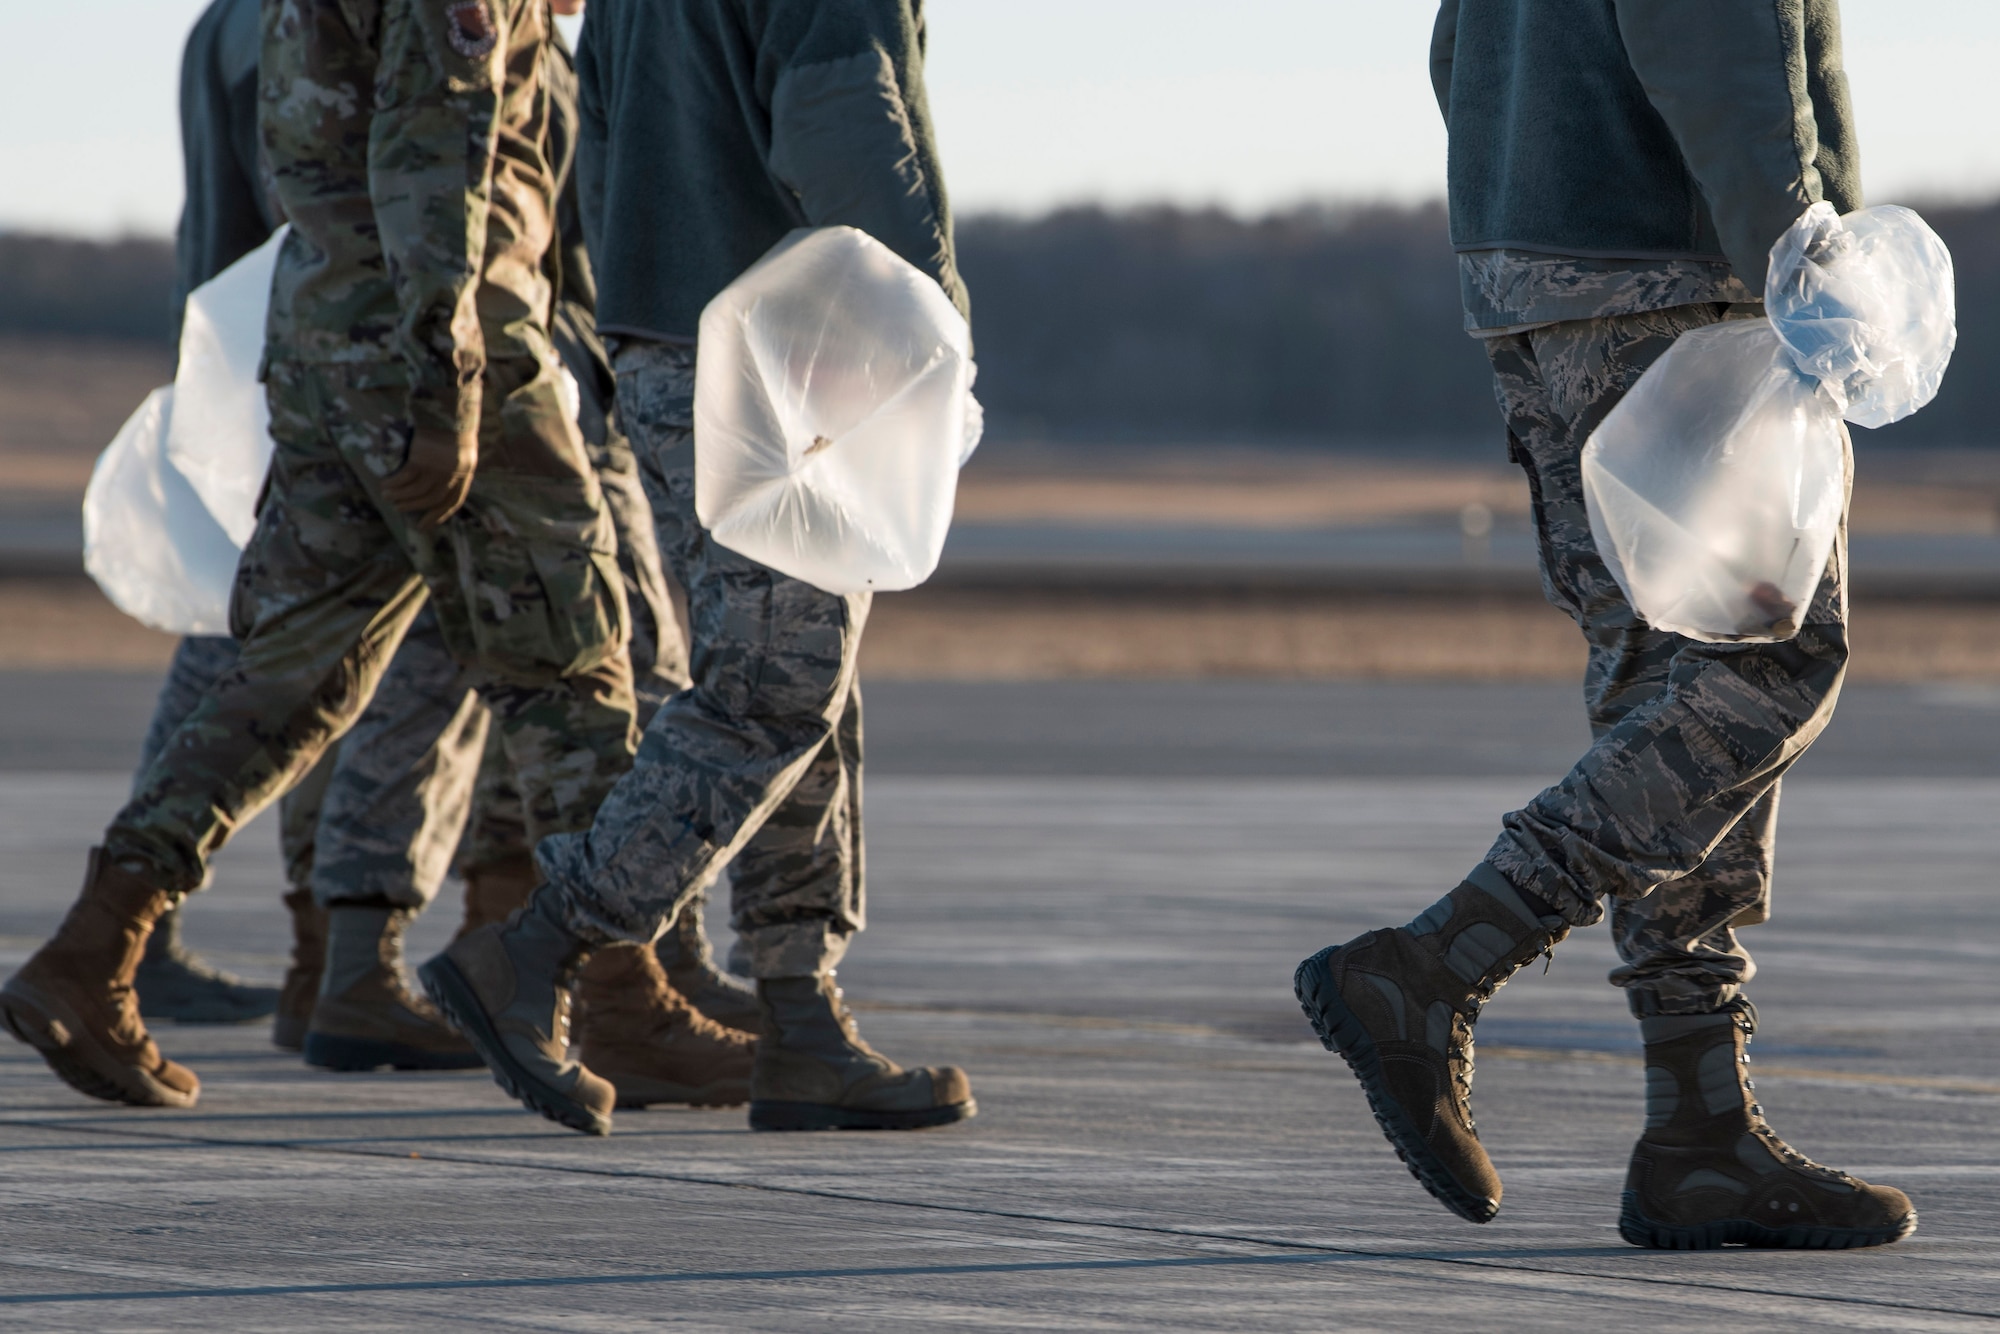 U.S. Airman from the 3rd Wing, 176th Wing, and 477th Fighter Group conduct a foreign object debris walk on the flightline at Joint Base Elmendorf-Richardson, Alaska, April 26, 2019. Airmen conducted the FOD walk to remove debris that could damage aircraft and hinder mission readiness.